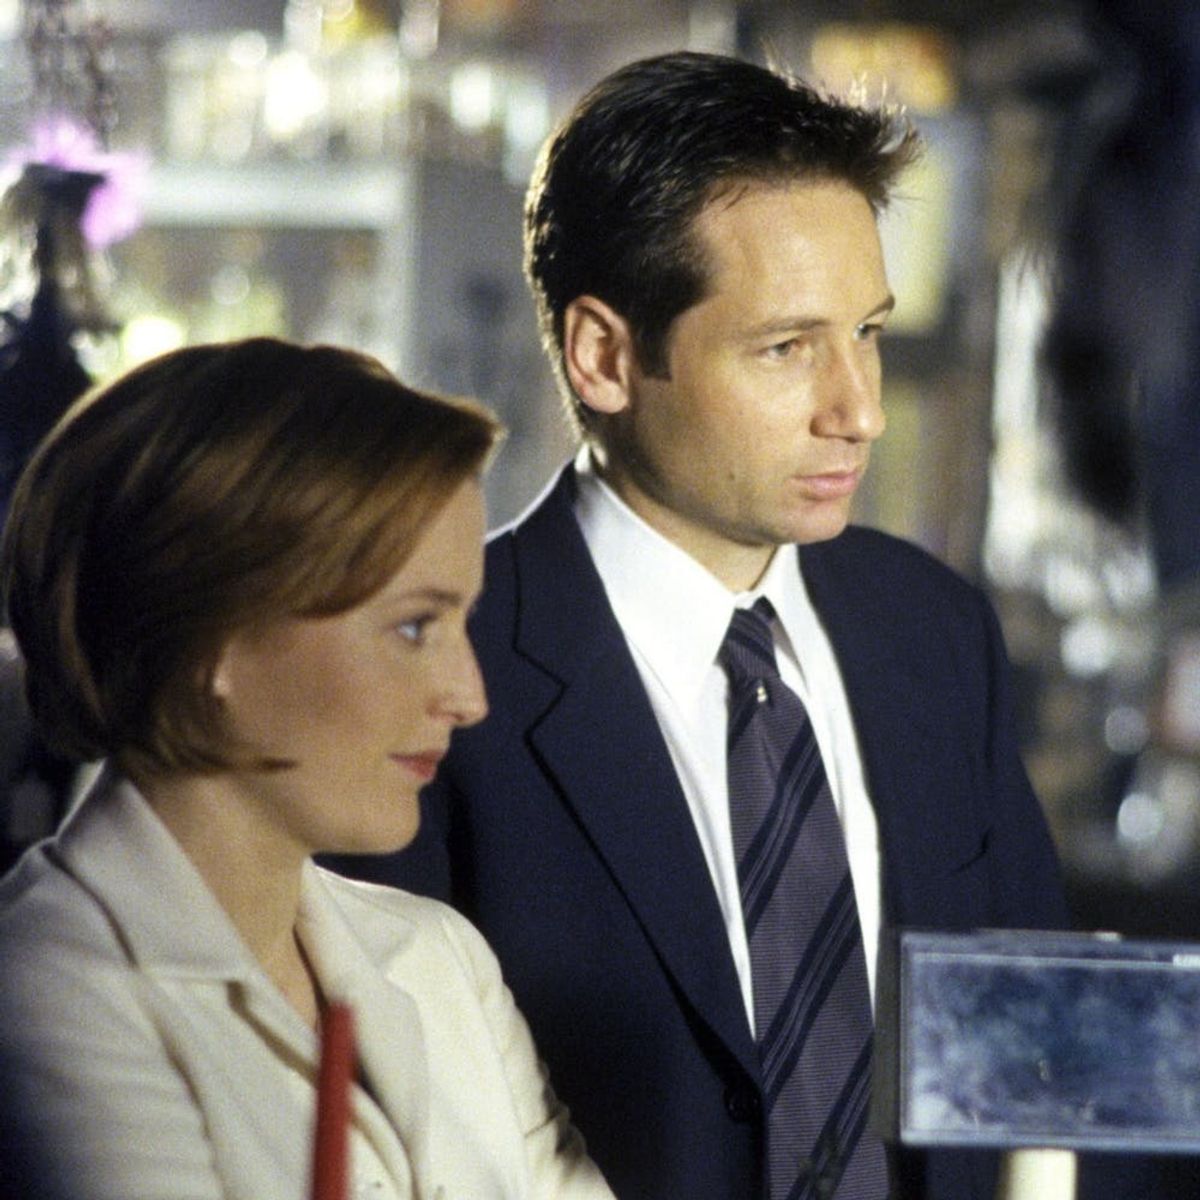 Gillian Anderson Is Ready to Say Goodbye to “The X-Files” After Next Season